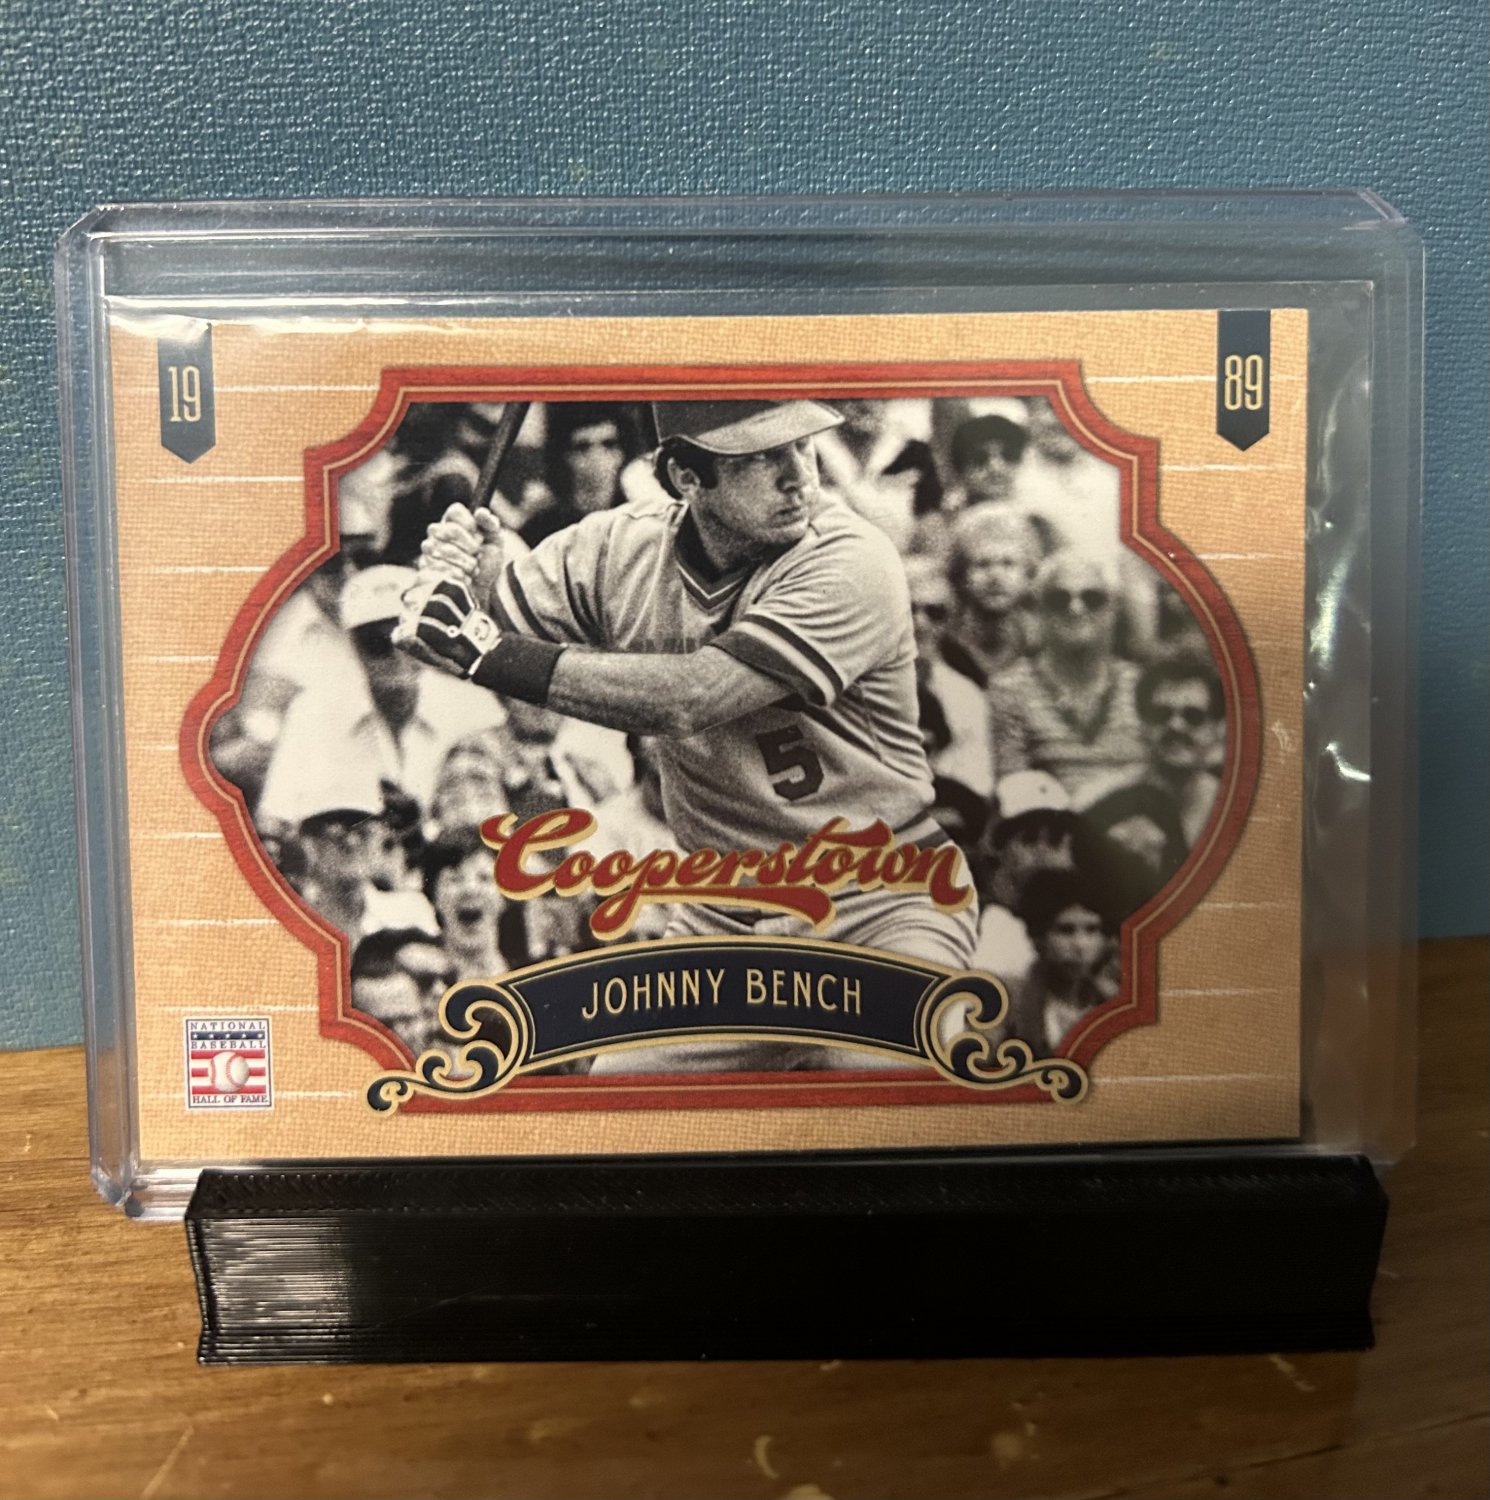 2012 Panini Cooperstown Johnny Bench #138